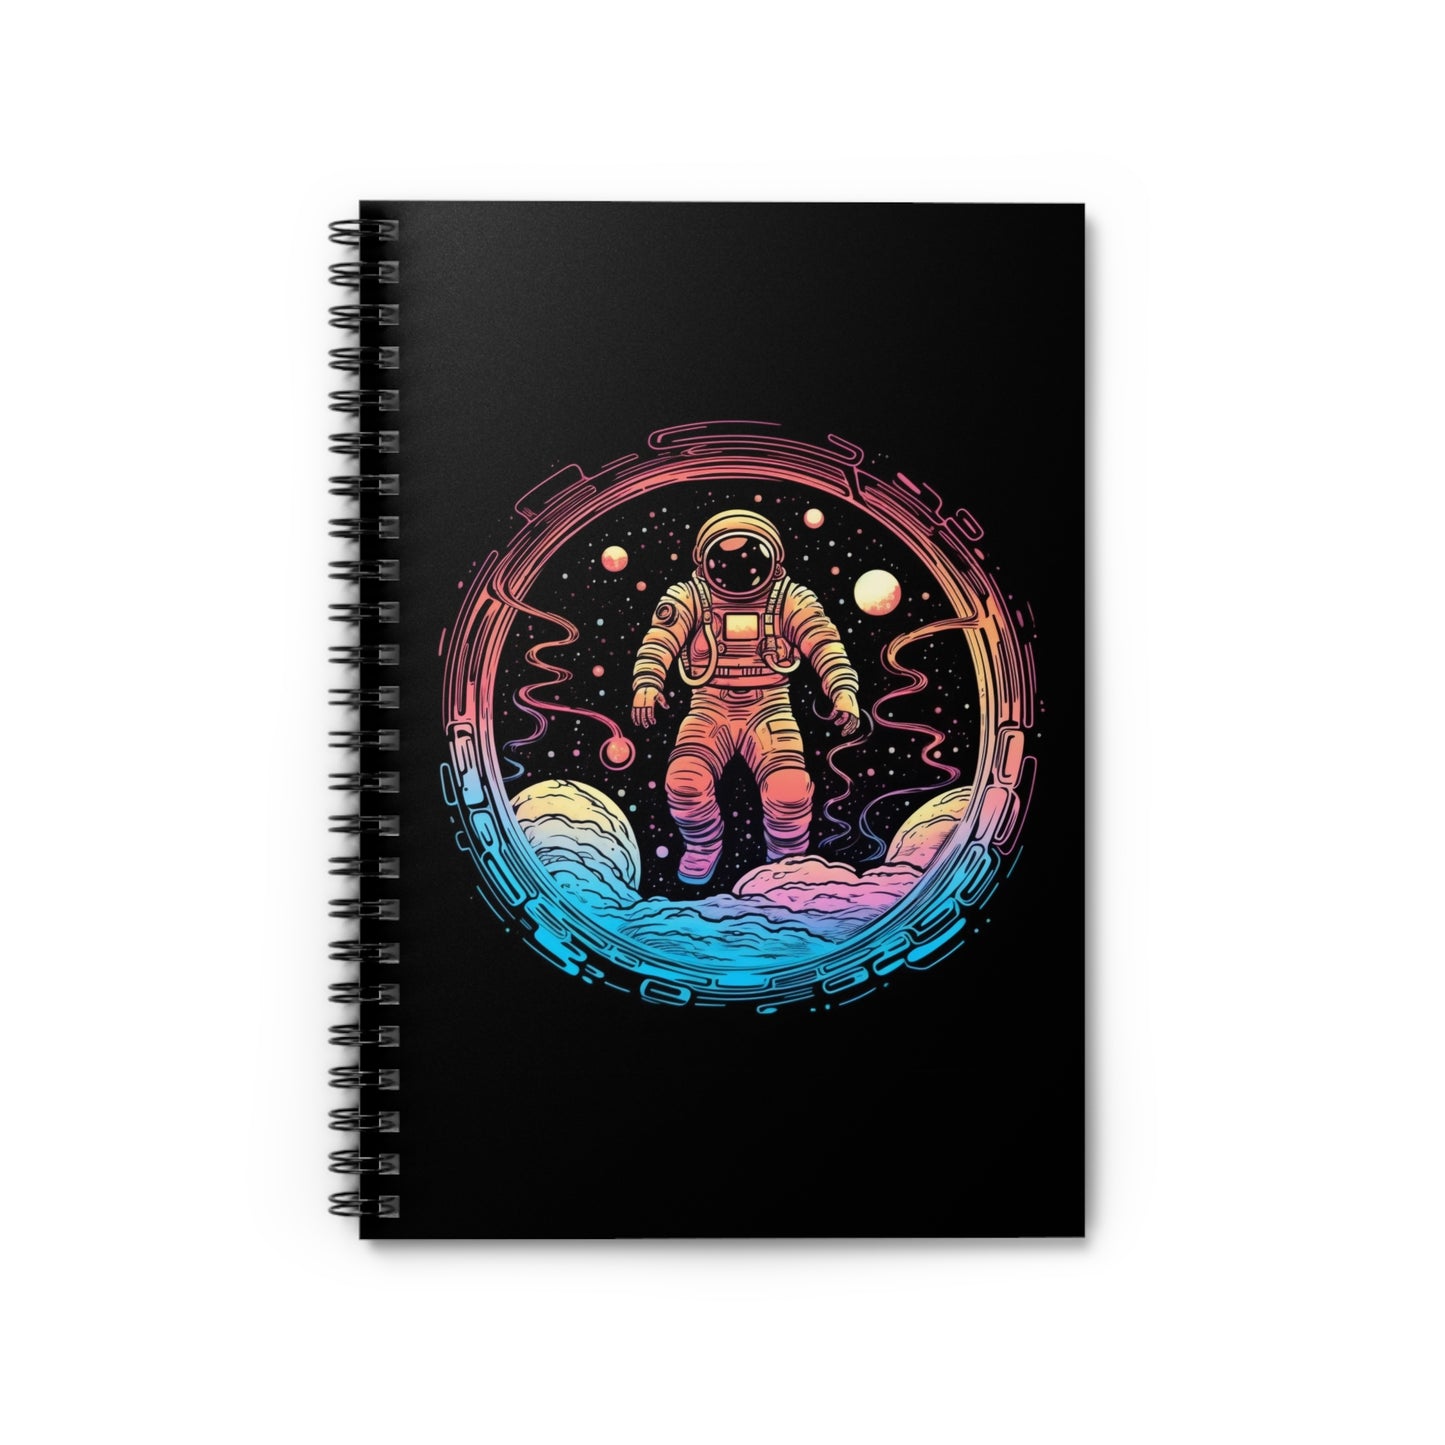 Astronaut Diary, Space Journal, Sci-Fi Spiral Notebook, Galactic Adventures Journal, Astronomy Notes, Dream Journal, Ruled Line